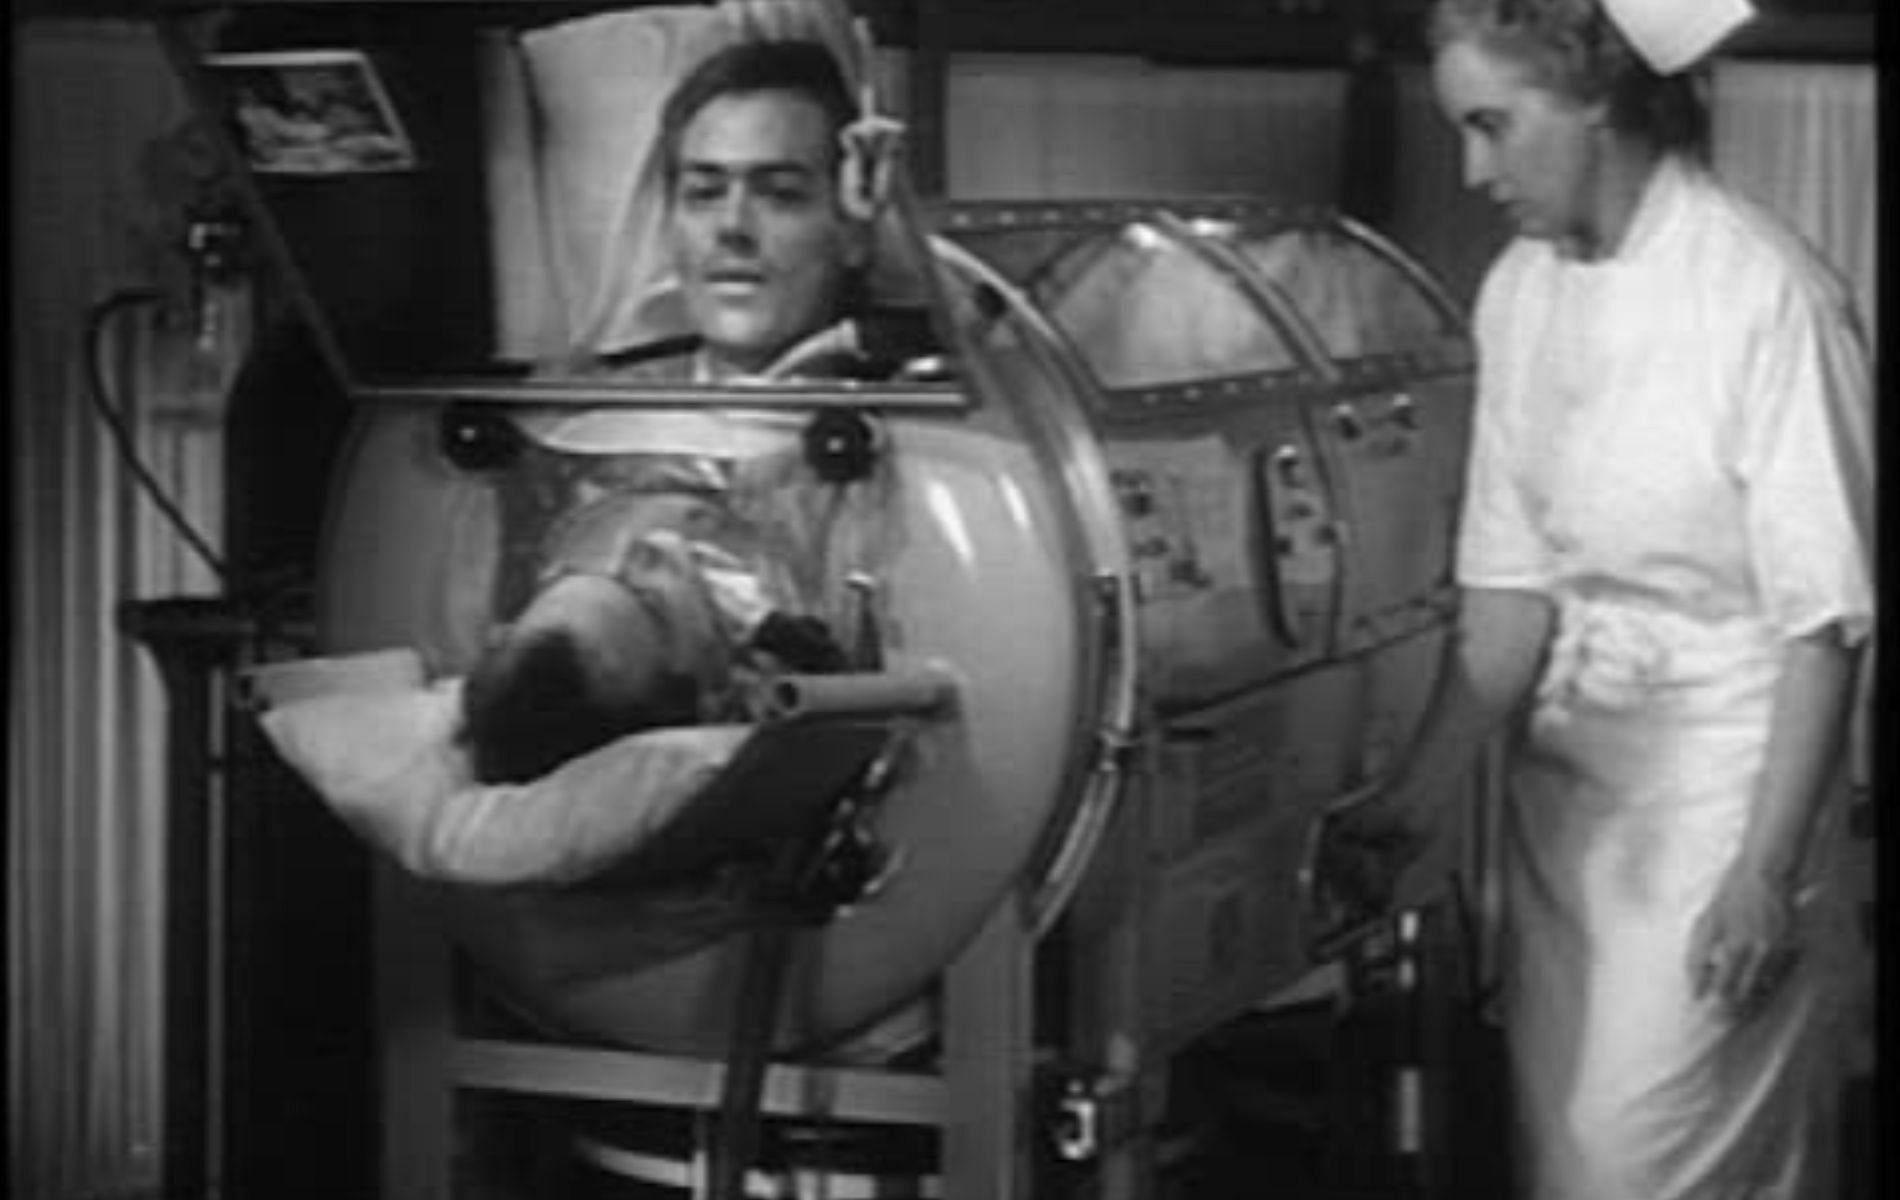 The story of a man in an iron lung (Image via Getty Images)